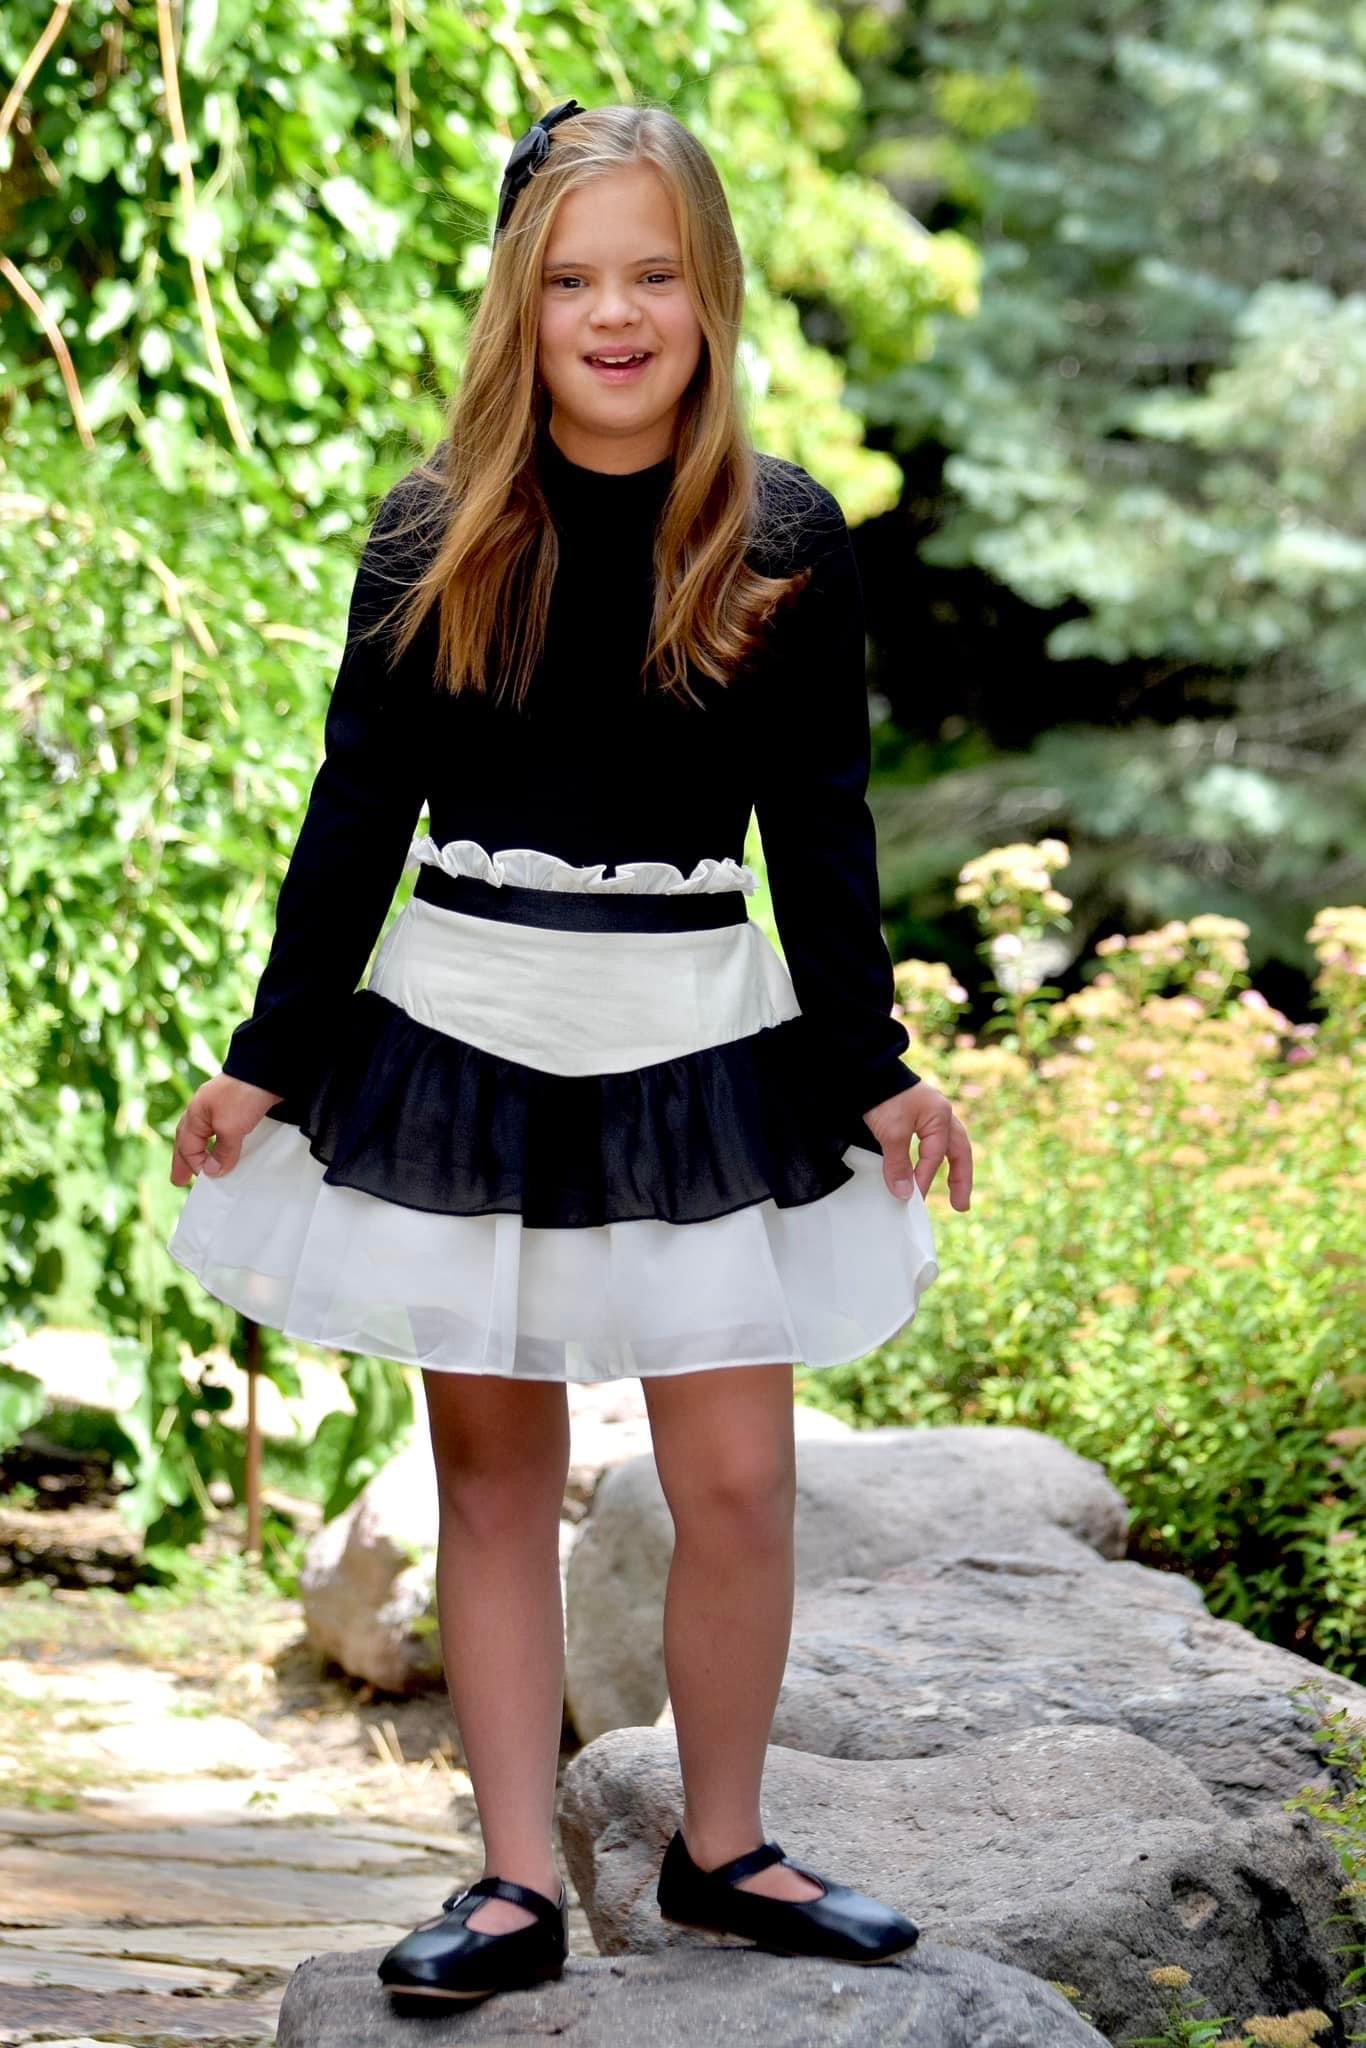 Sweet Melody Black and Ivory Bodysuit/Leo and Skirt Simplicity Set - Evie's Closet Clothing